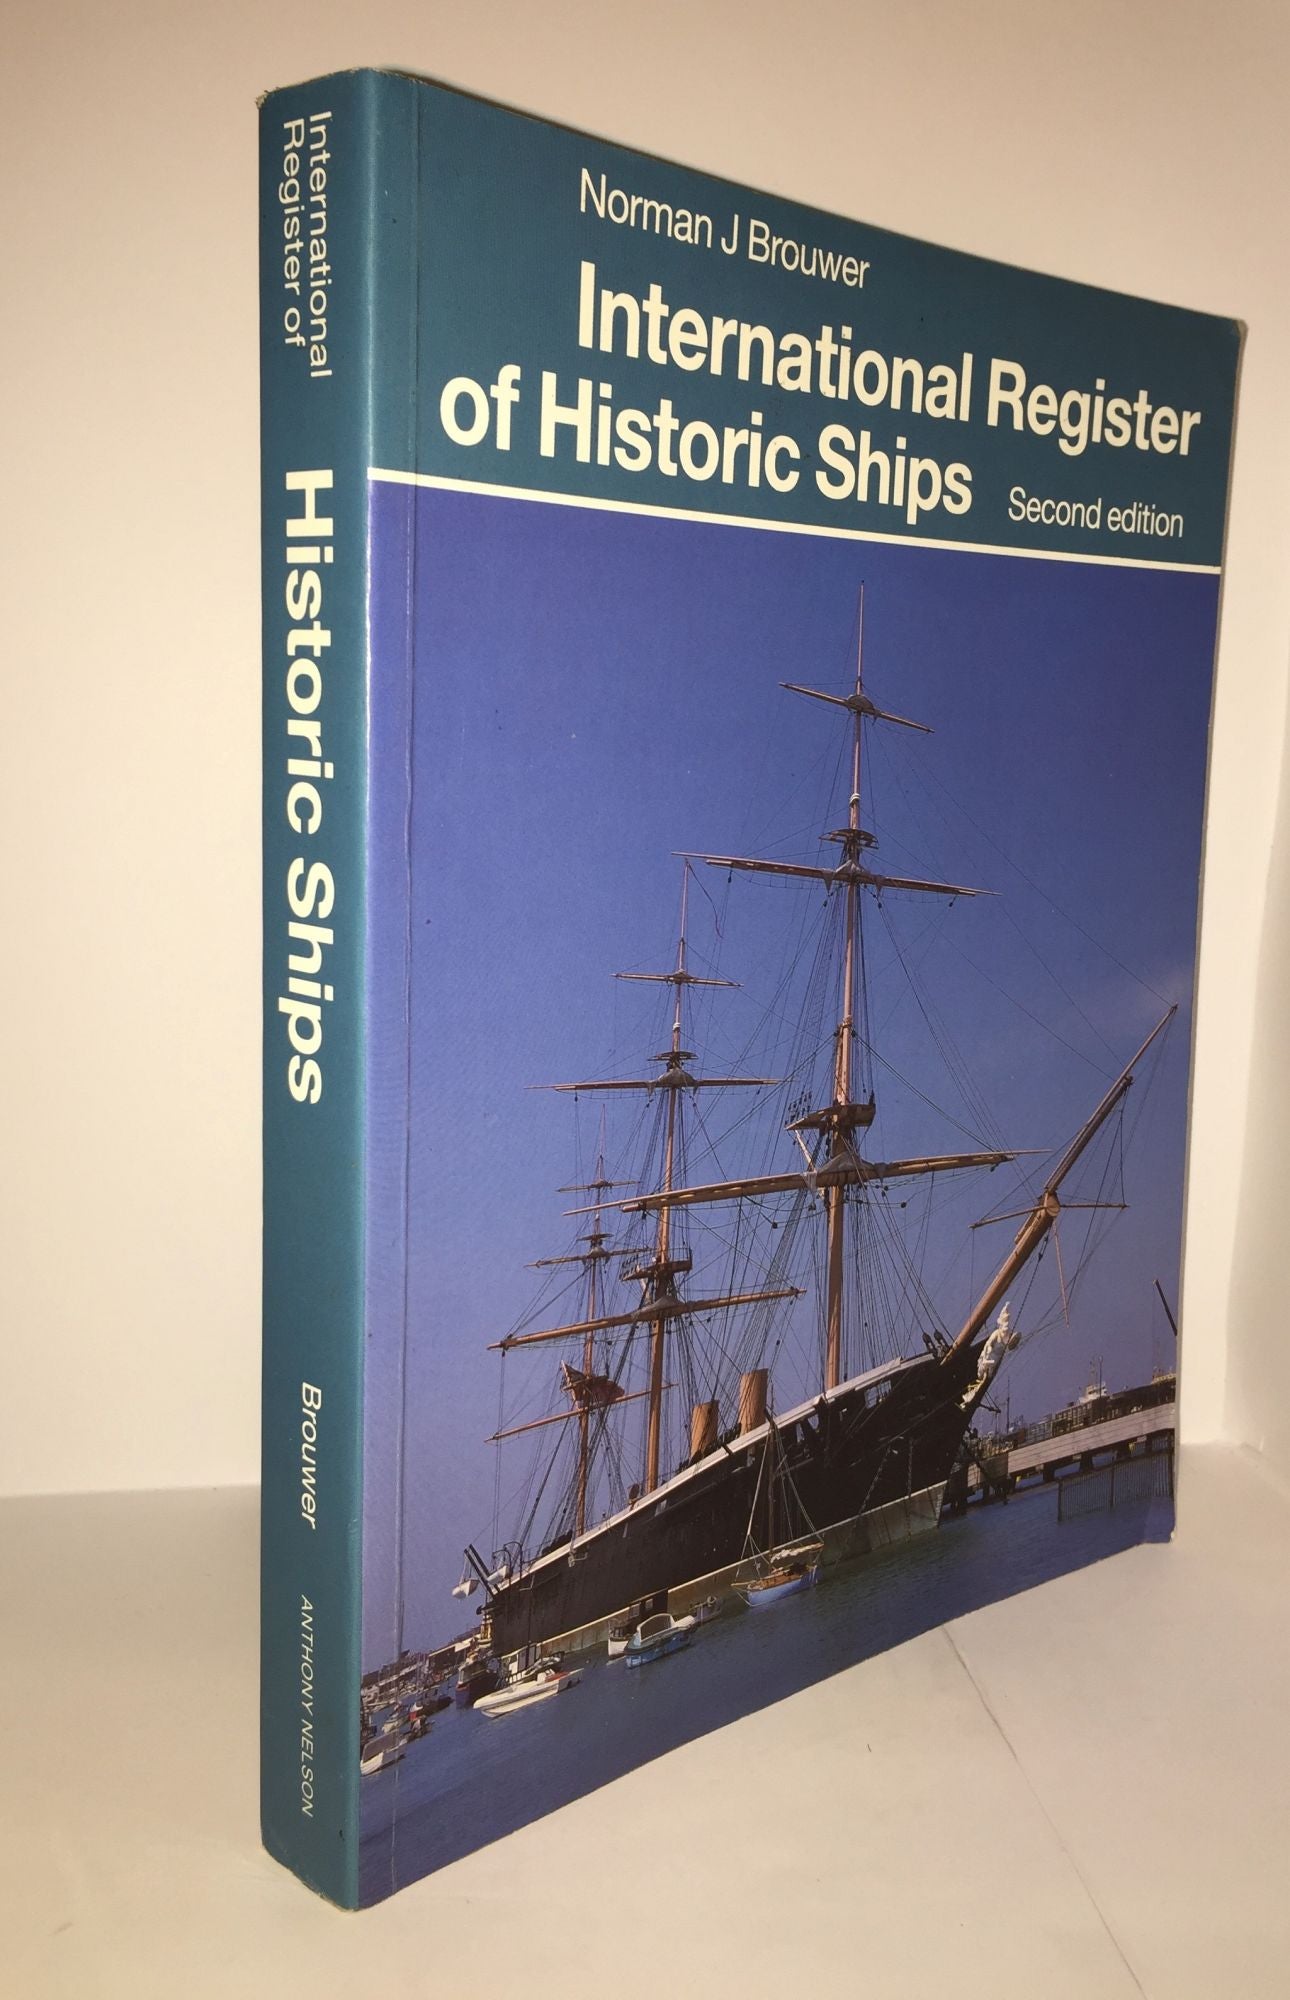 BROUWER Norman J. - International Register of Historic Ships Second Edition